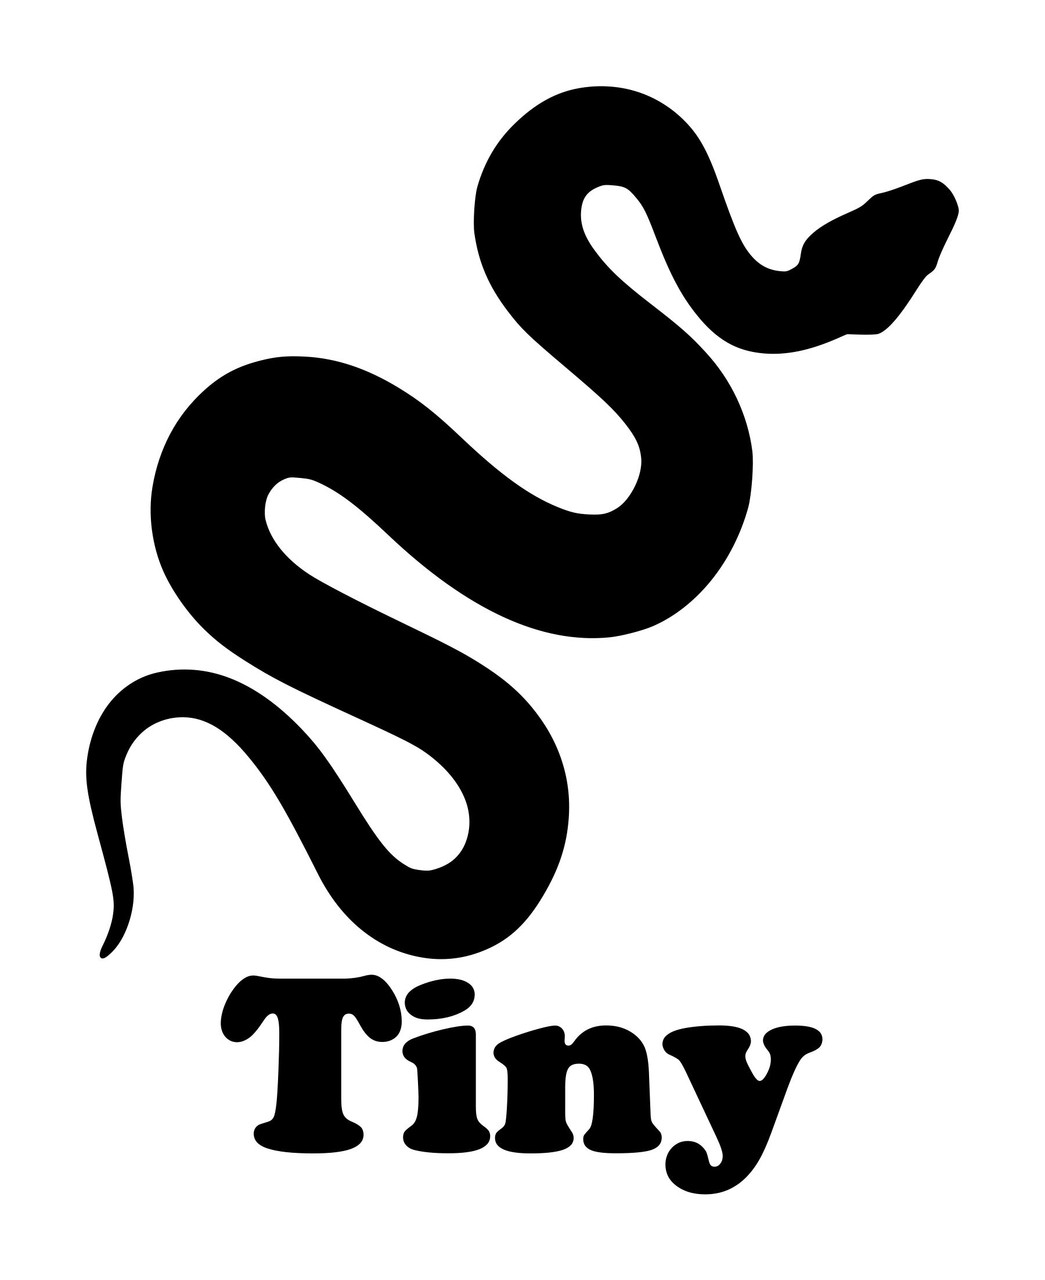 SNAKE with Personalized Name Vinyl Decal Sticker - Boa Ball Python Reptile Corn Gopher California Kingsnake